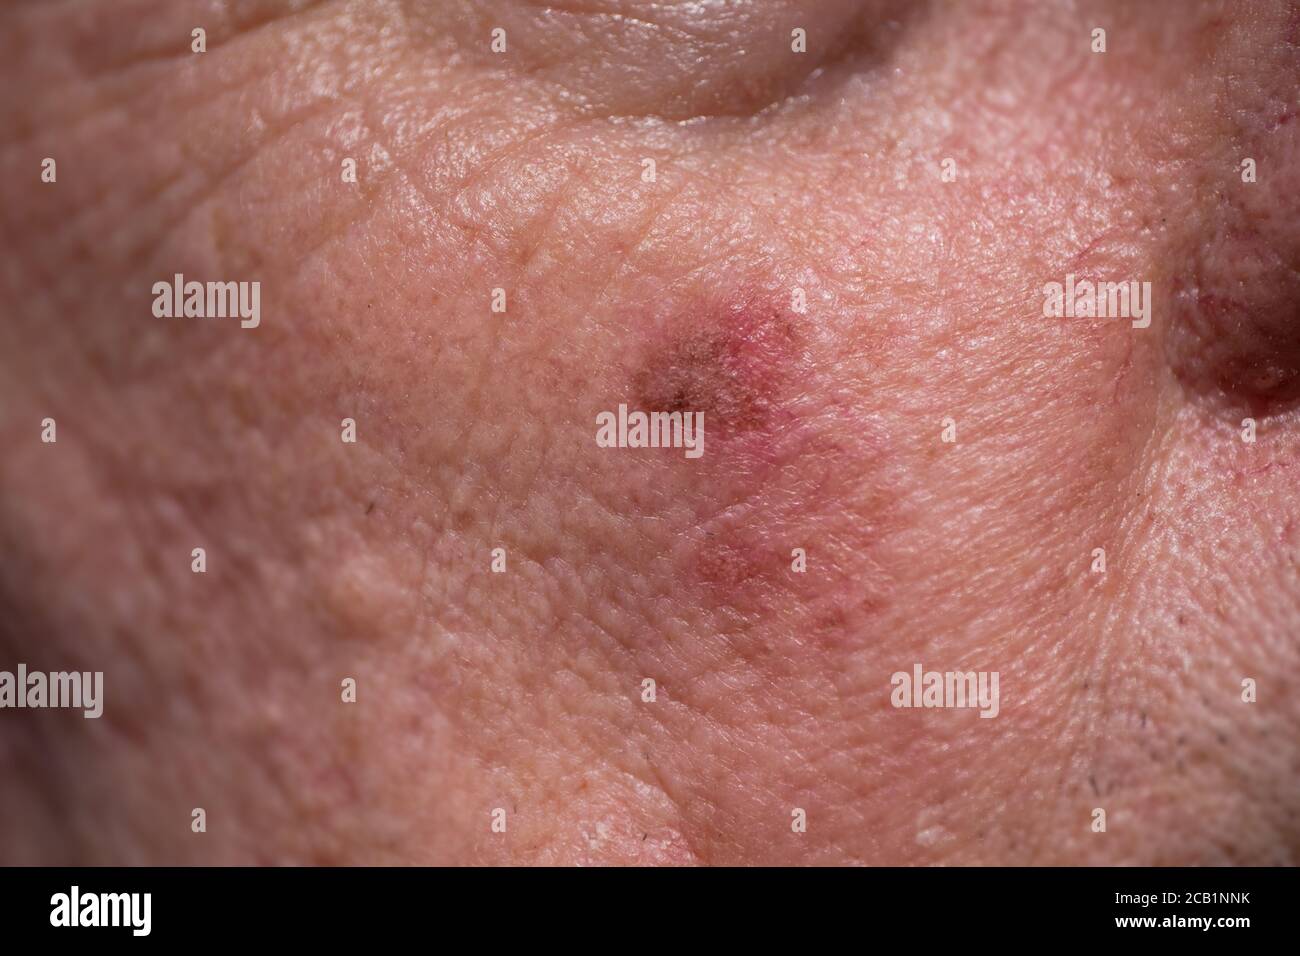 Red crusty lesions of actinic keratosis or sunspots on sun-damaged skin on the cheek under the right eye in the face of a man Stock Photo